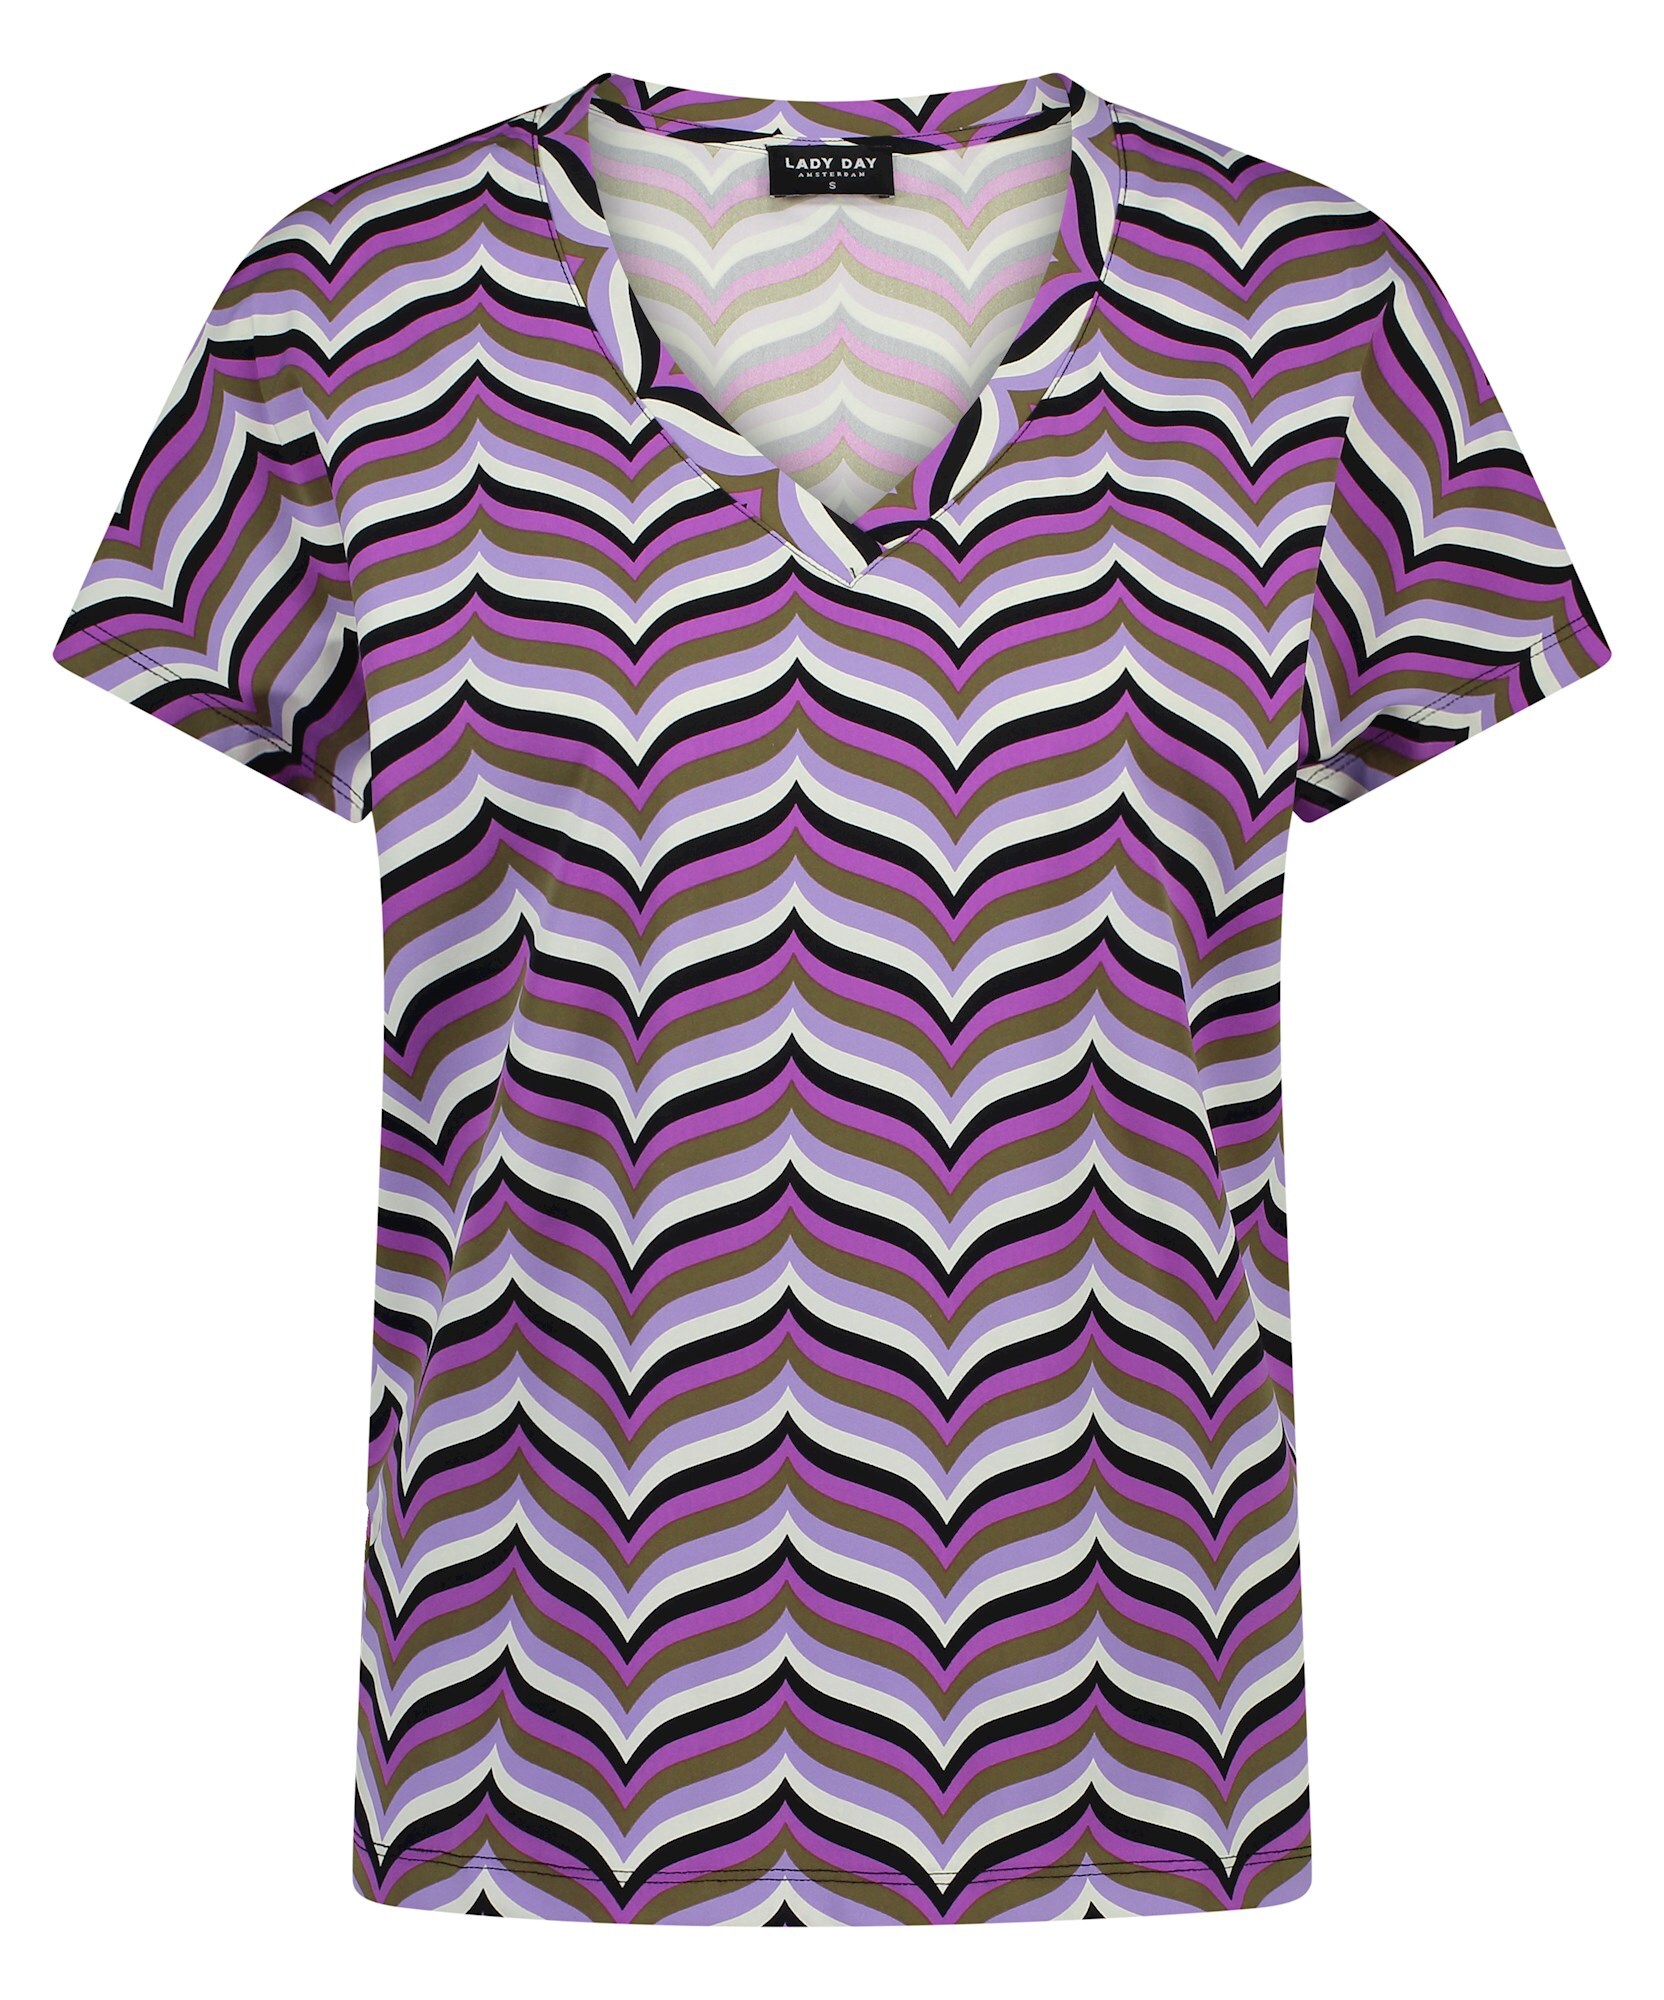 LADY DAY Top Romee Wave Print